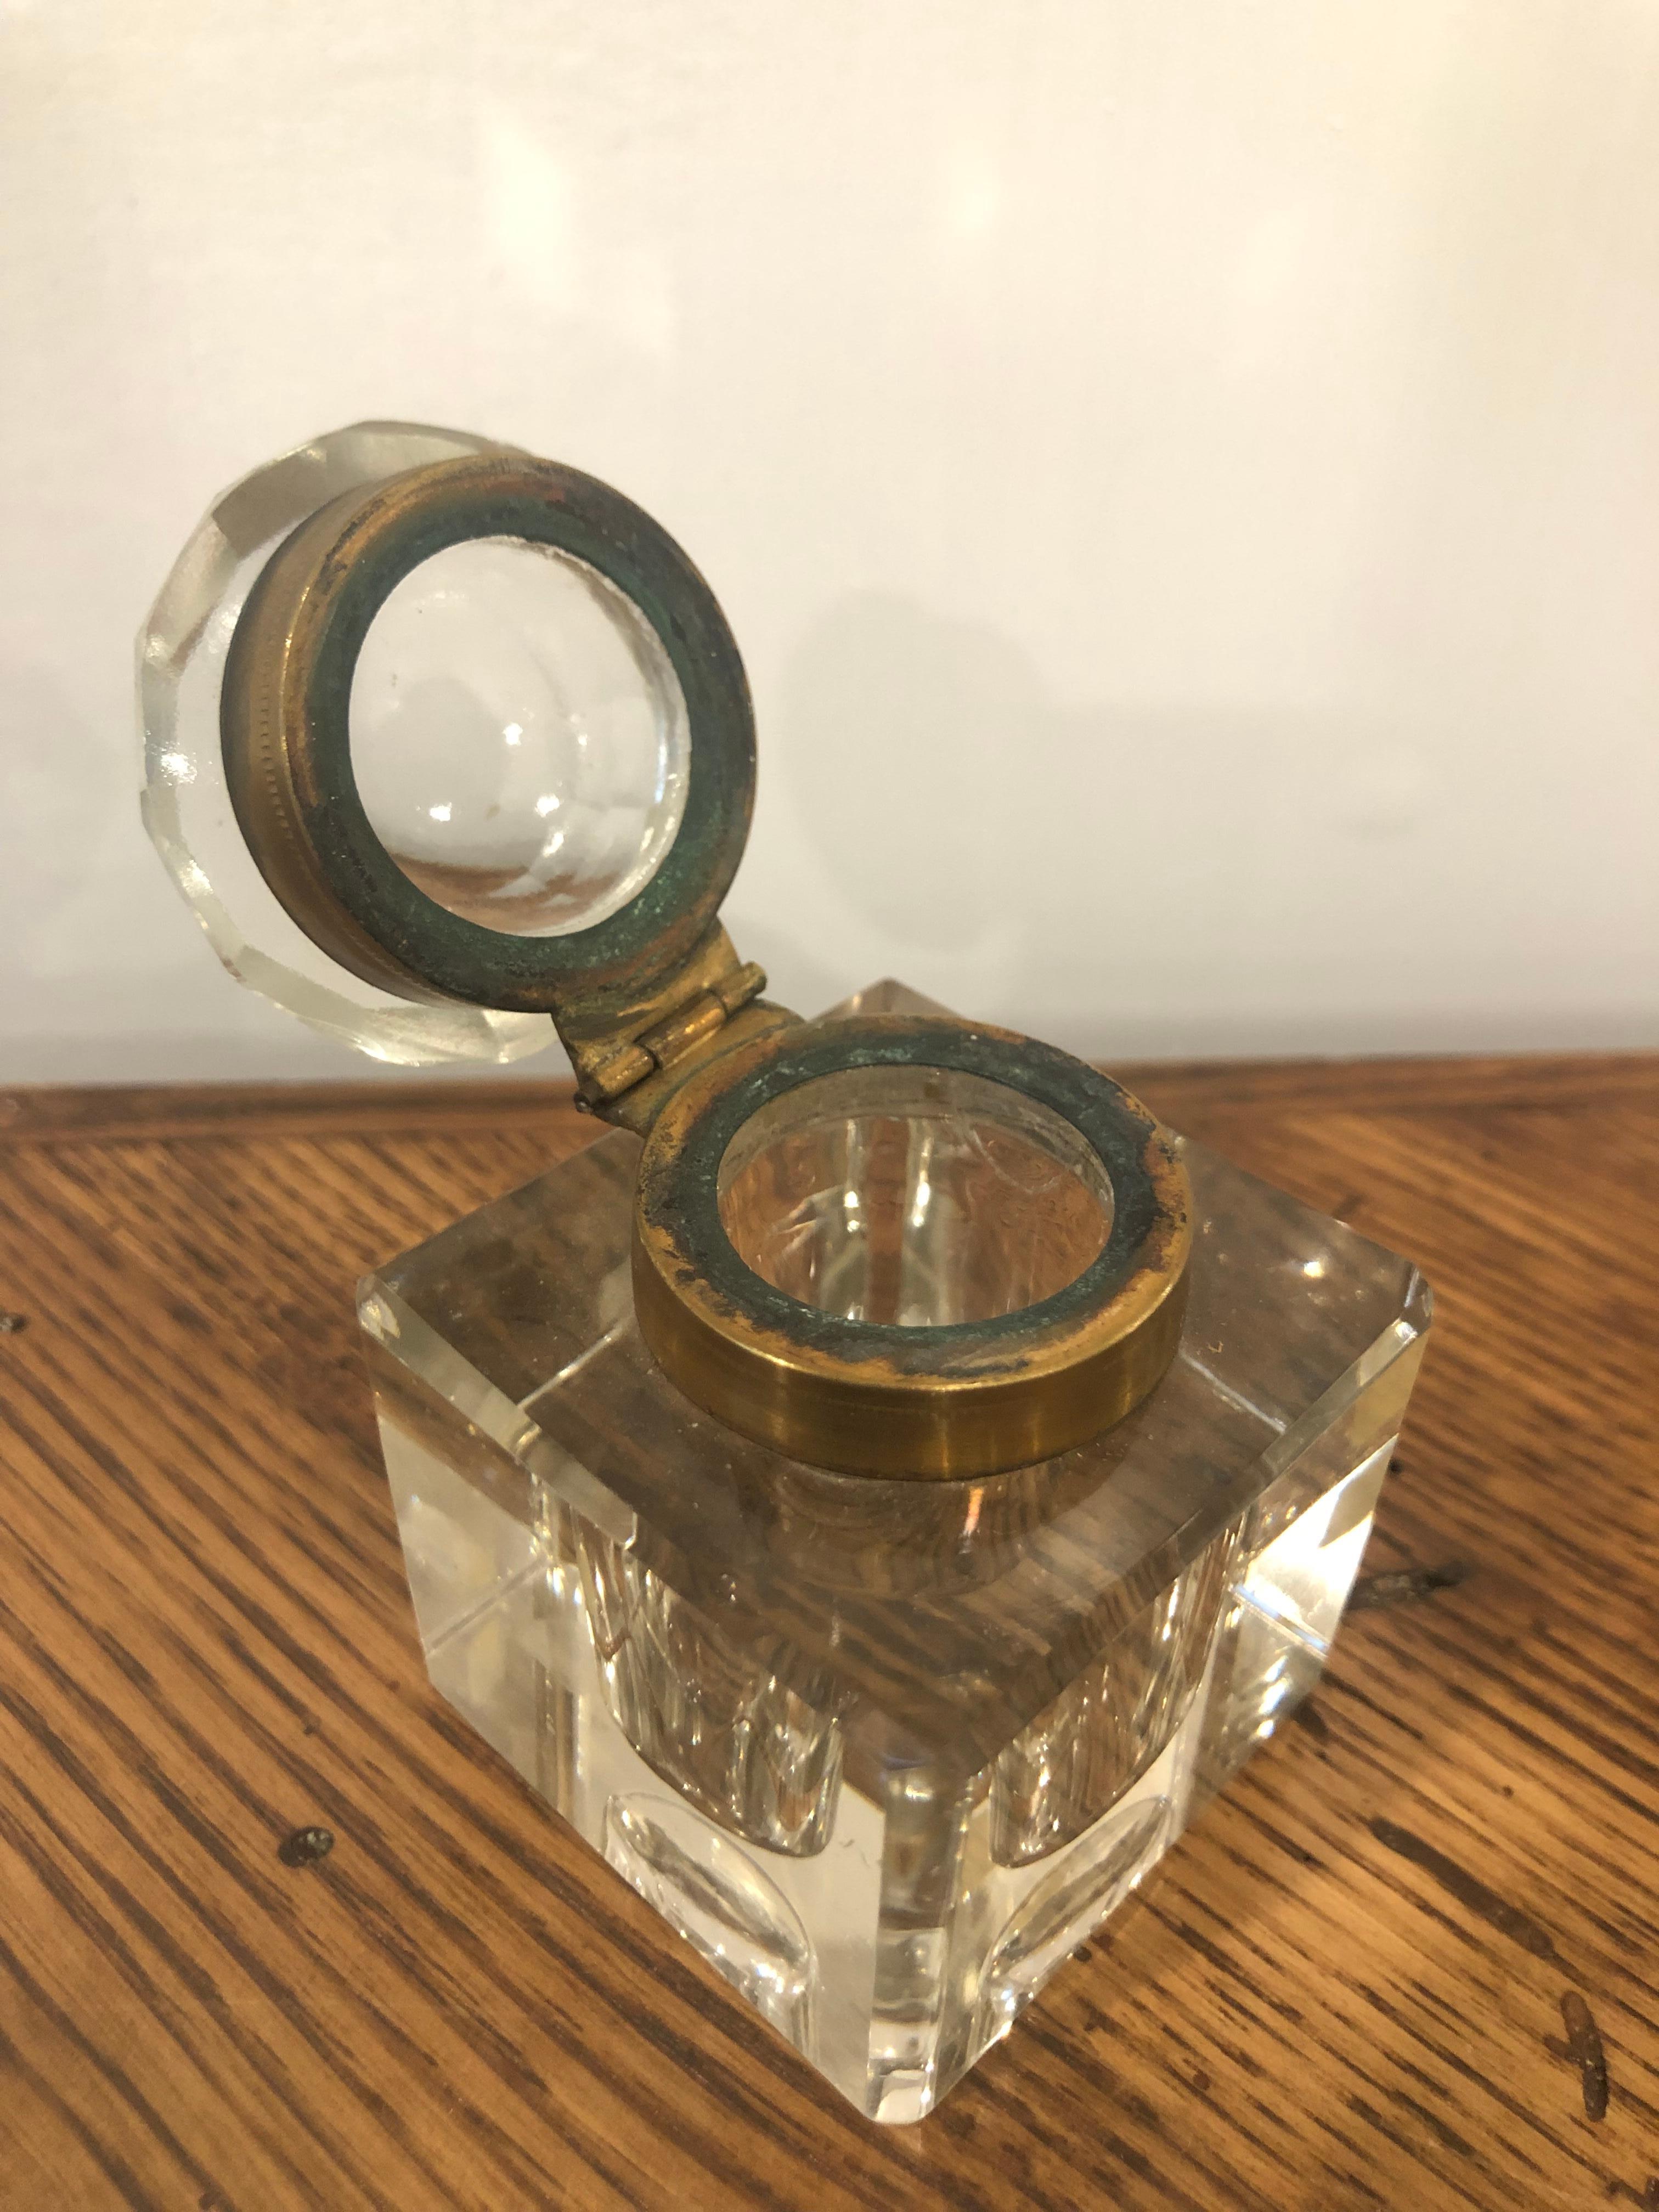 Late 19th Century crystal inkwell with a brass collar and chamfered edges, English circa 1880. This is one of many pieces we received from a private collector who traveled the world buying beautiful pieces.